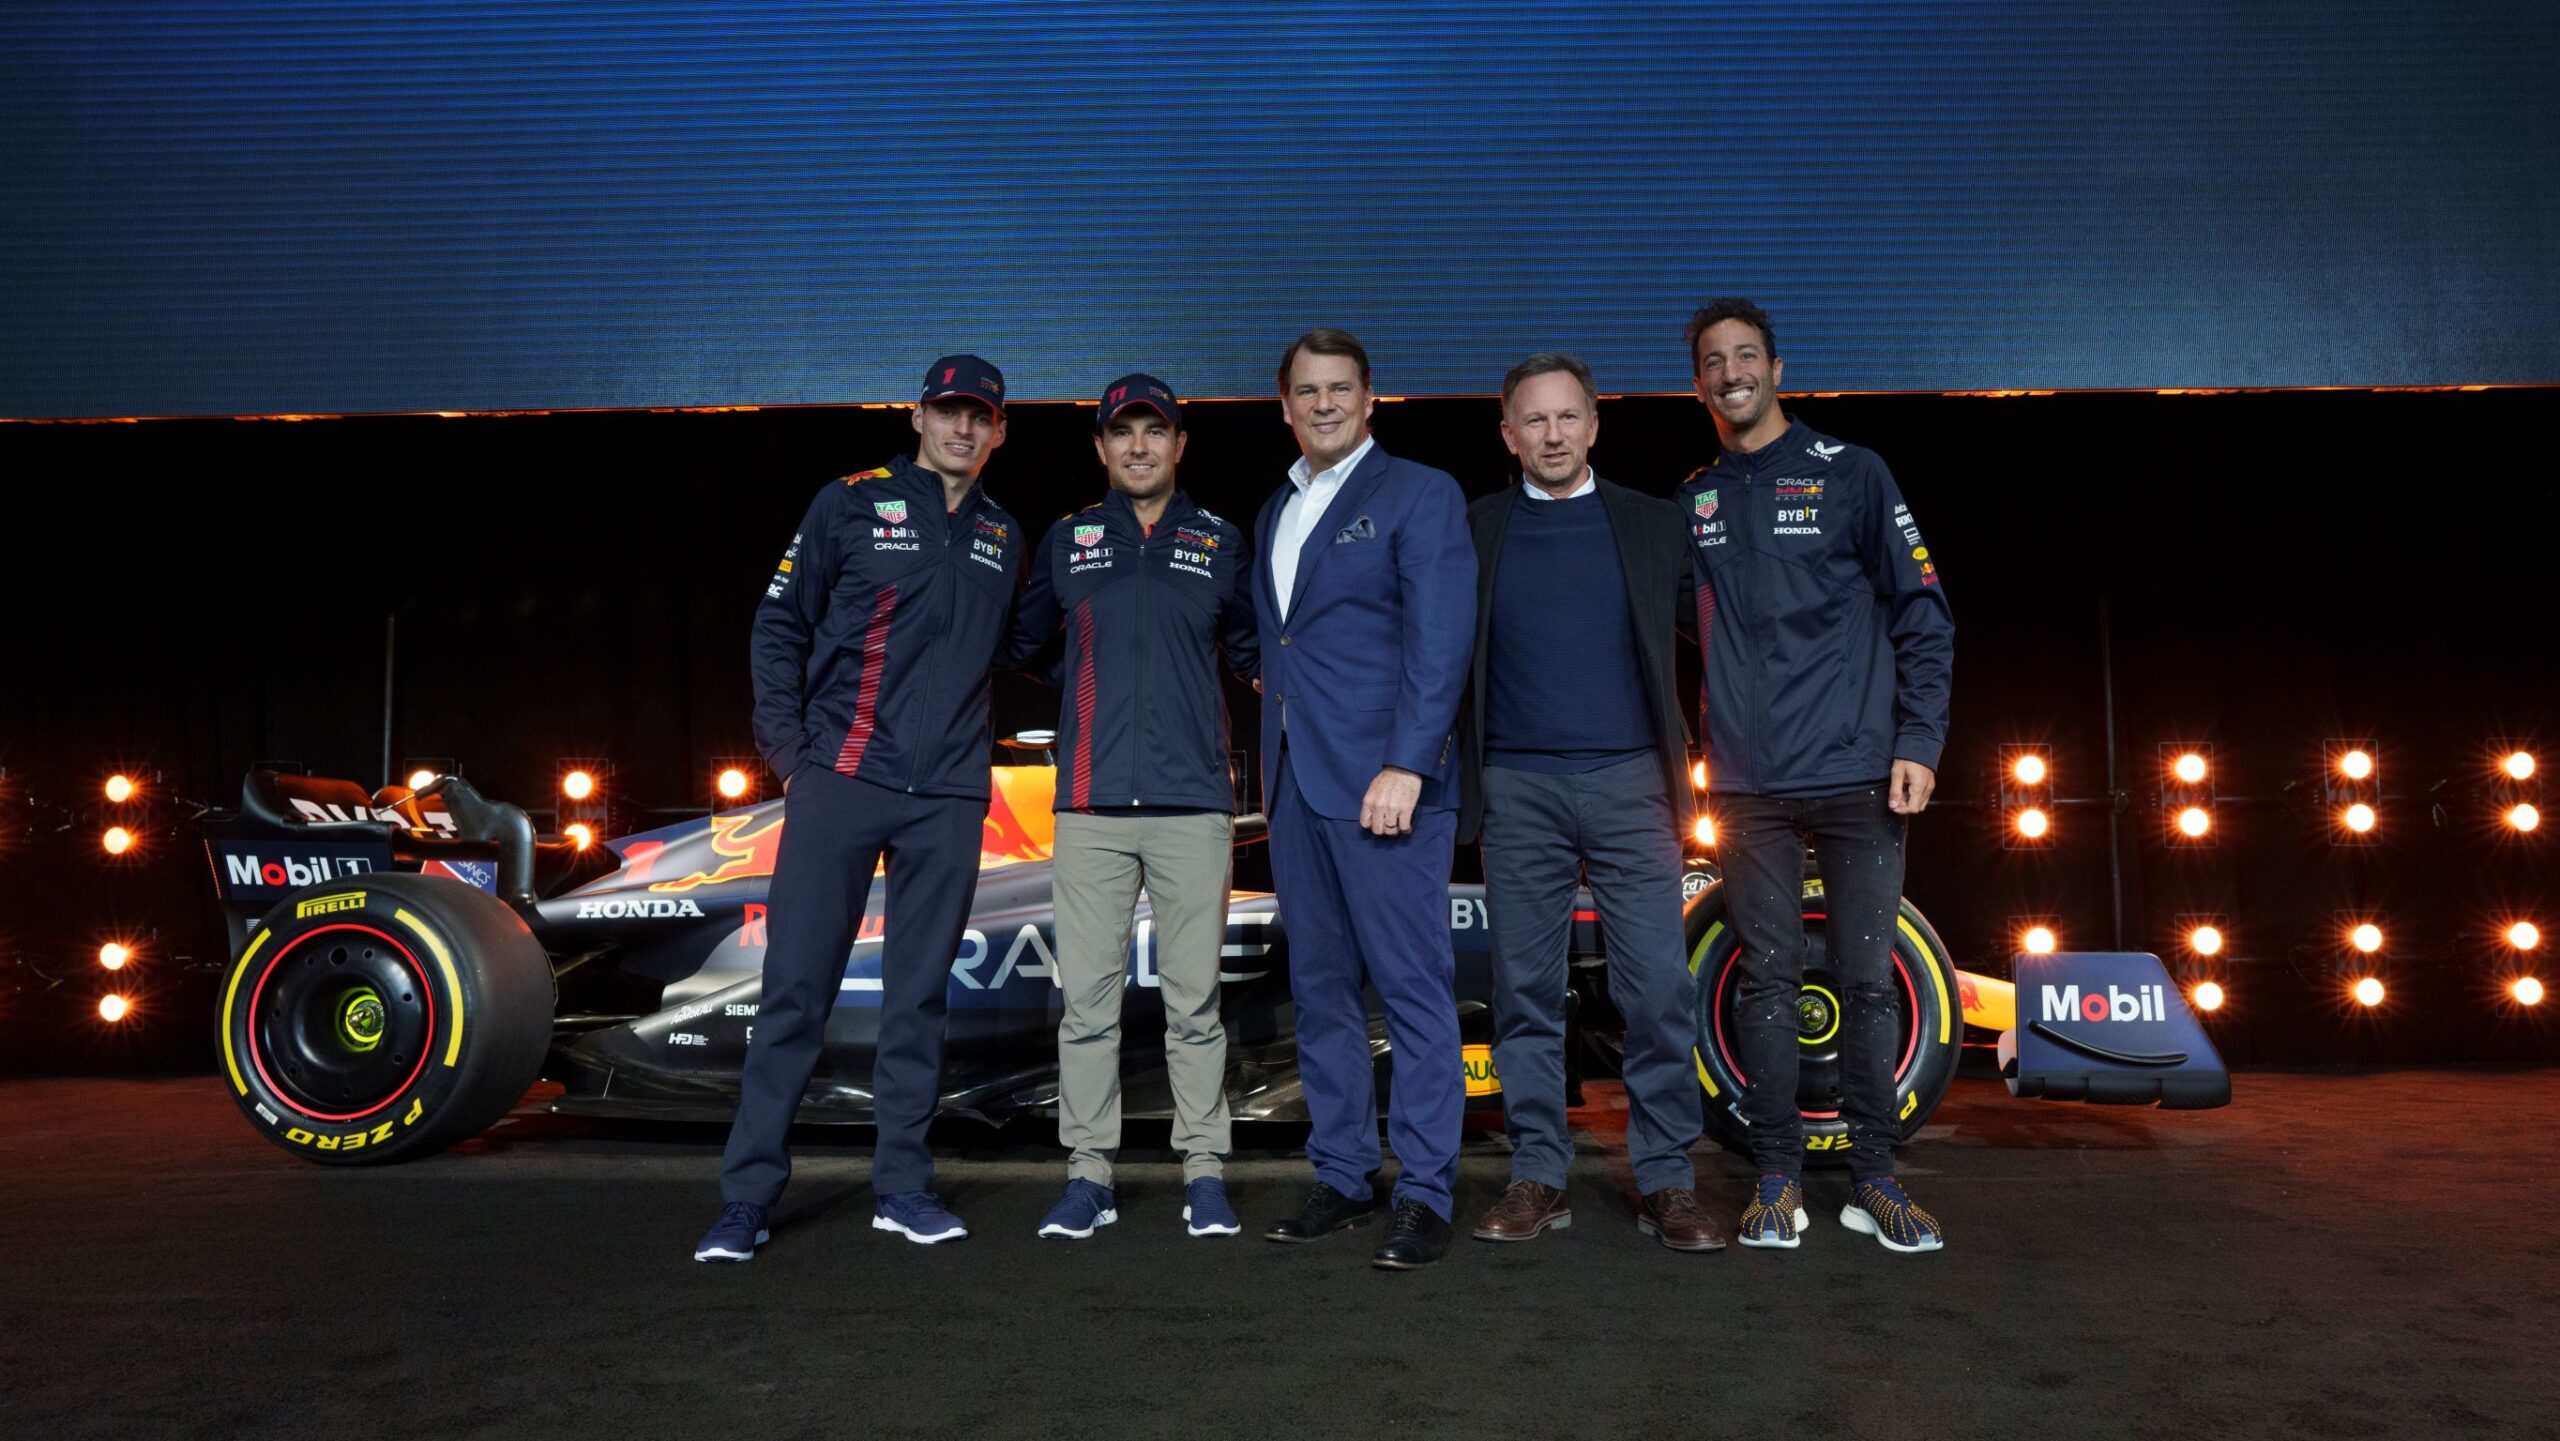 CEO of Ford pictured with Christian Horner, Max Verstappen, Sergio Perez and Daniel Ricciardo of the Red Bull F1 Team.